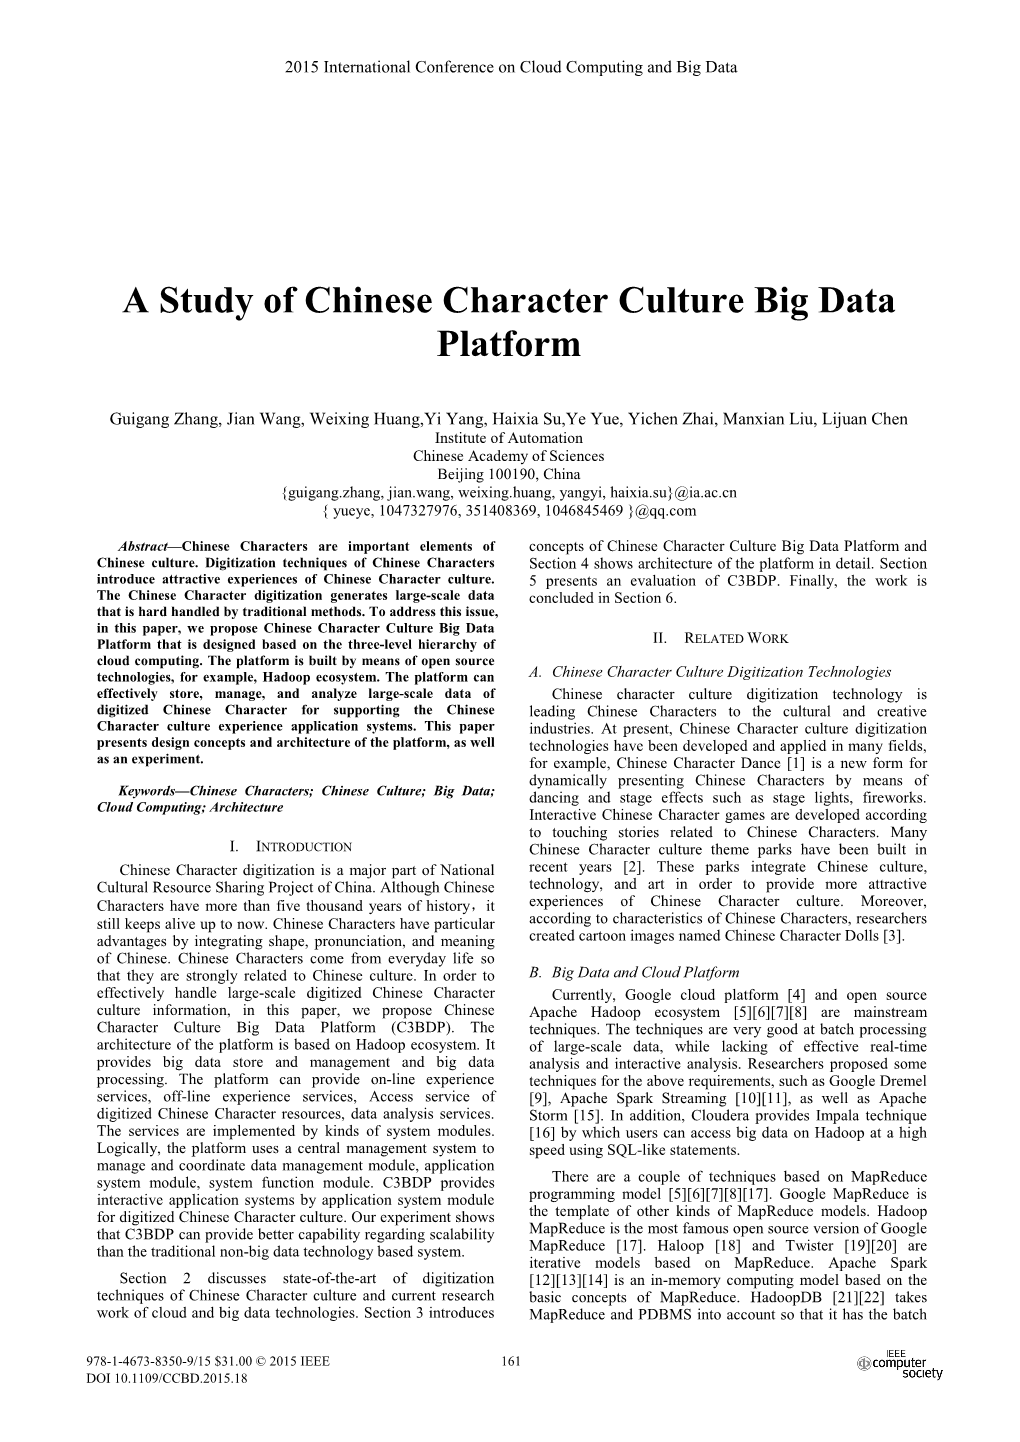 A Study of Chinese Character Culture Big Data Platform